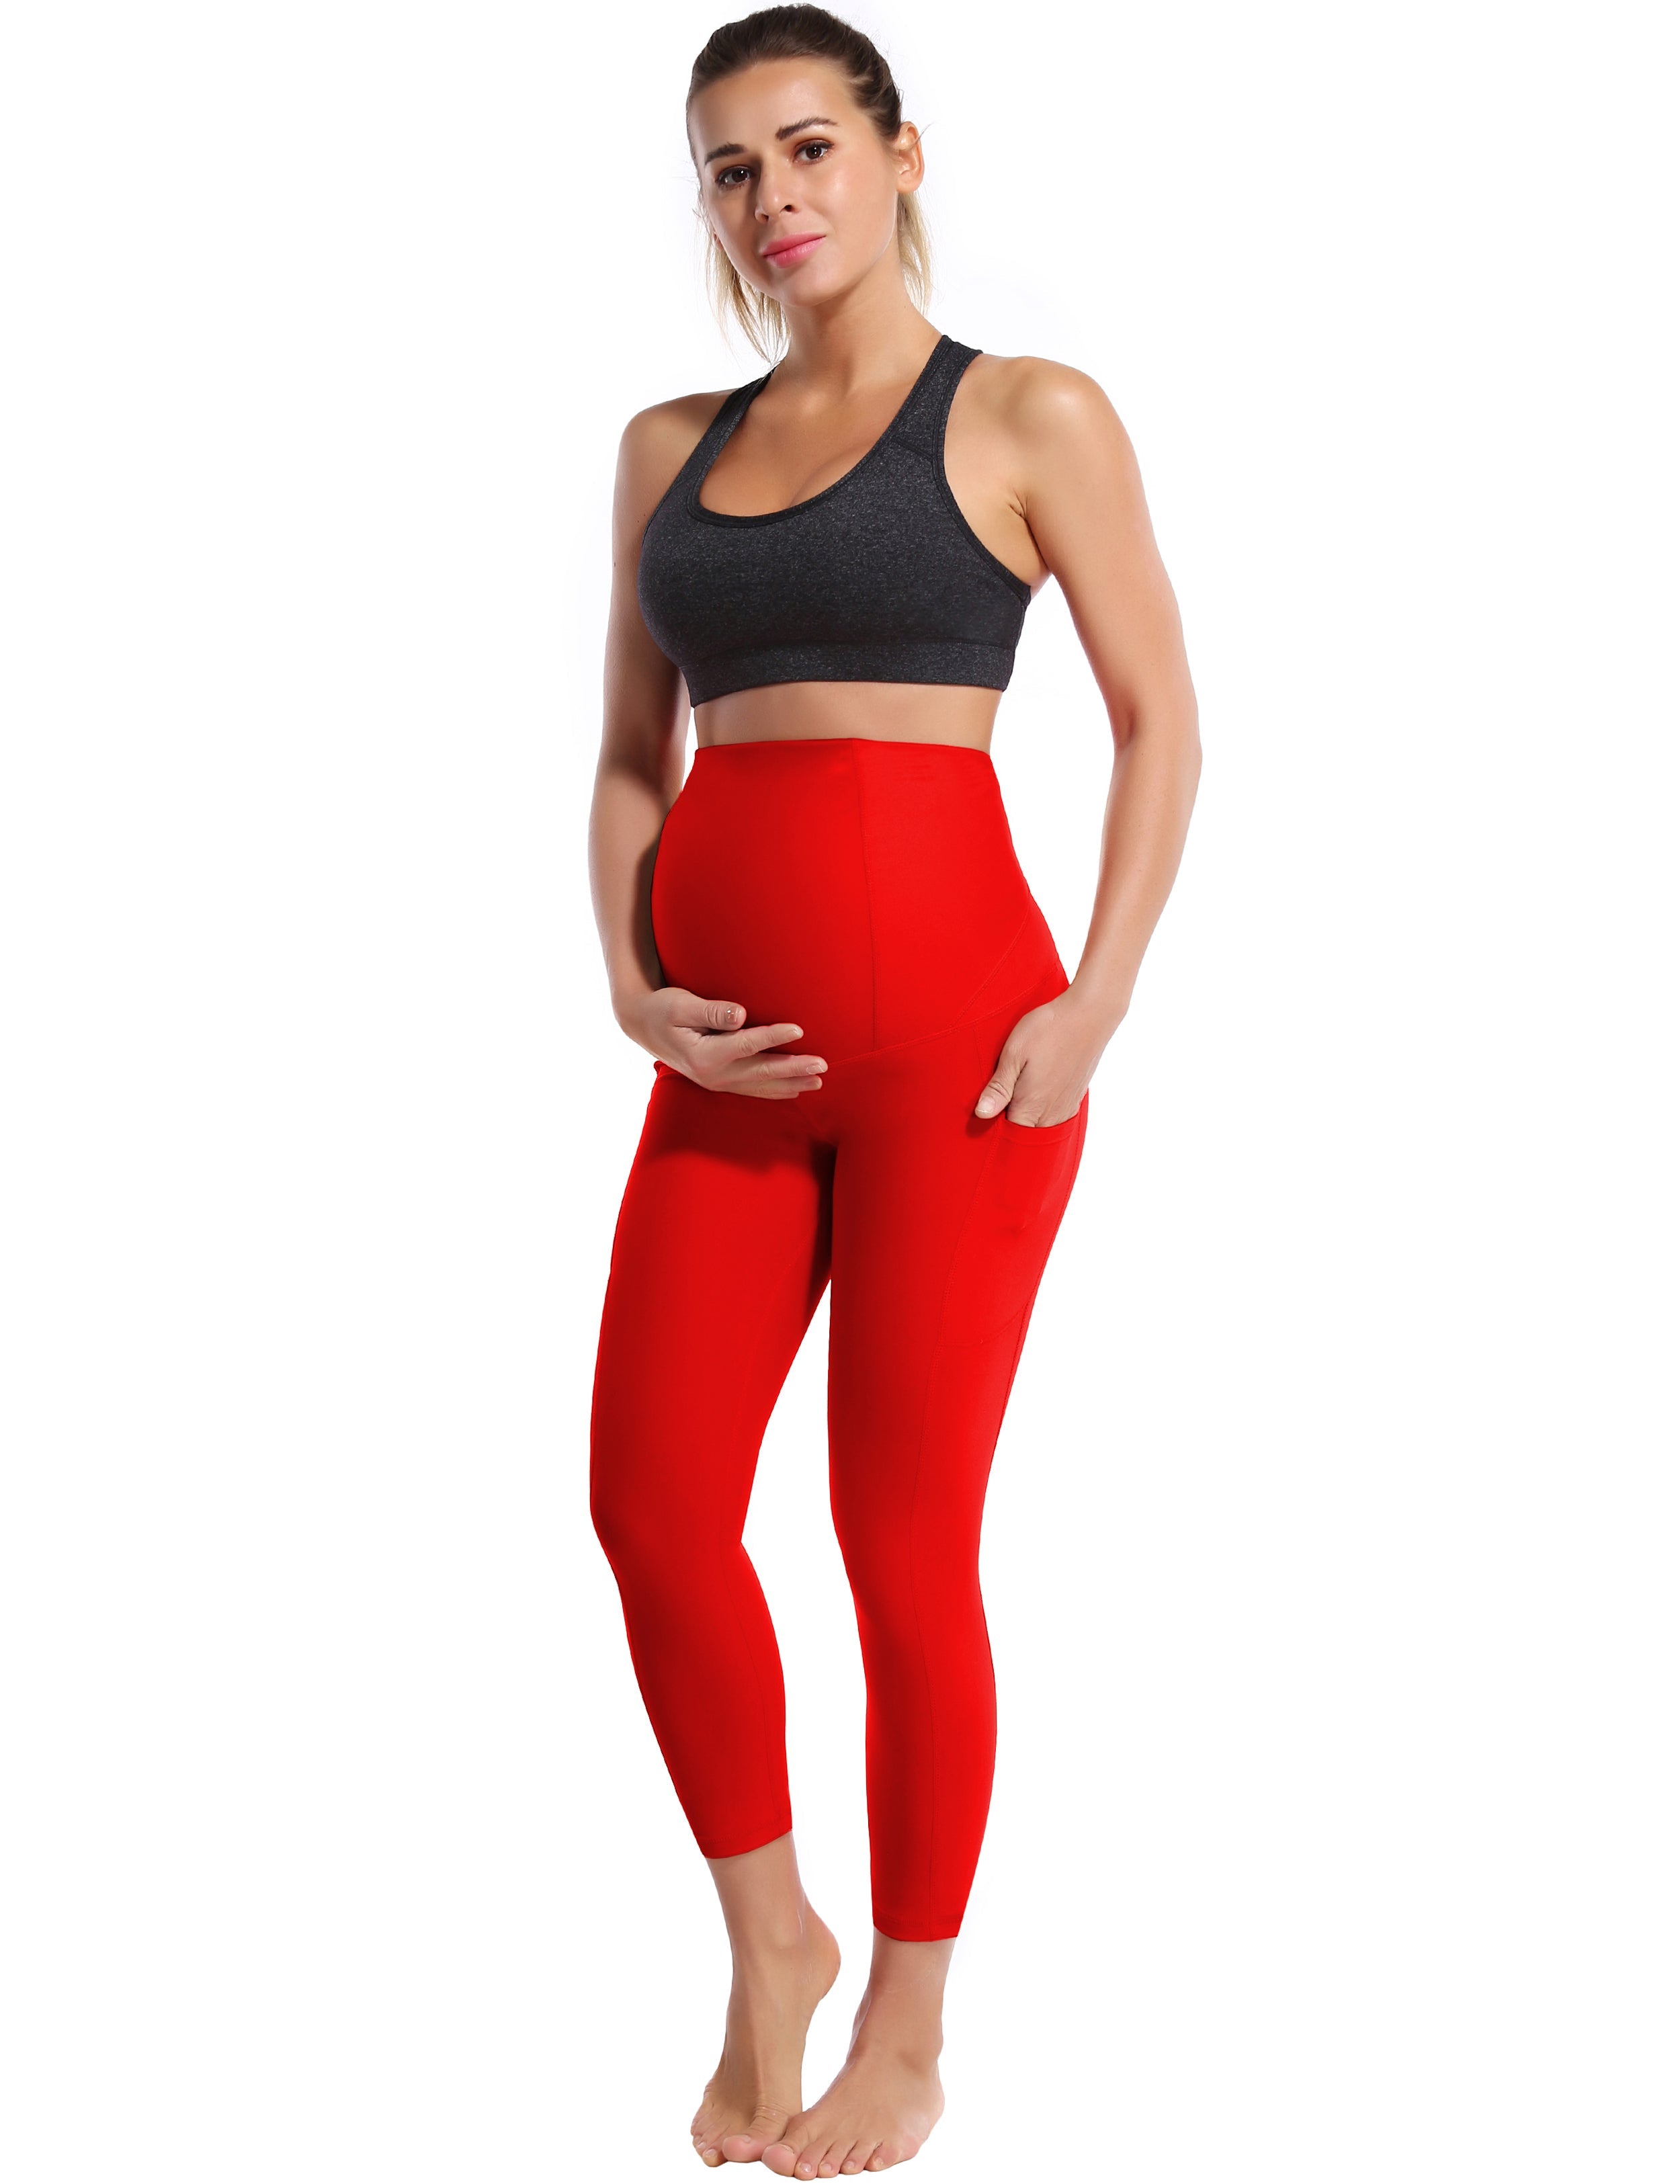 22" Side Pockets Maternity Gym Pants scarlet 87%Nylon/13%Spandex Softest-ever fabric High elasticity 4-way stretch Fabric doesn't attract lint easily No see-through Moisture-wicking Machine wash